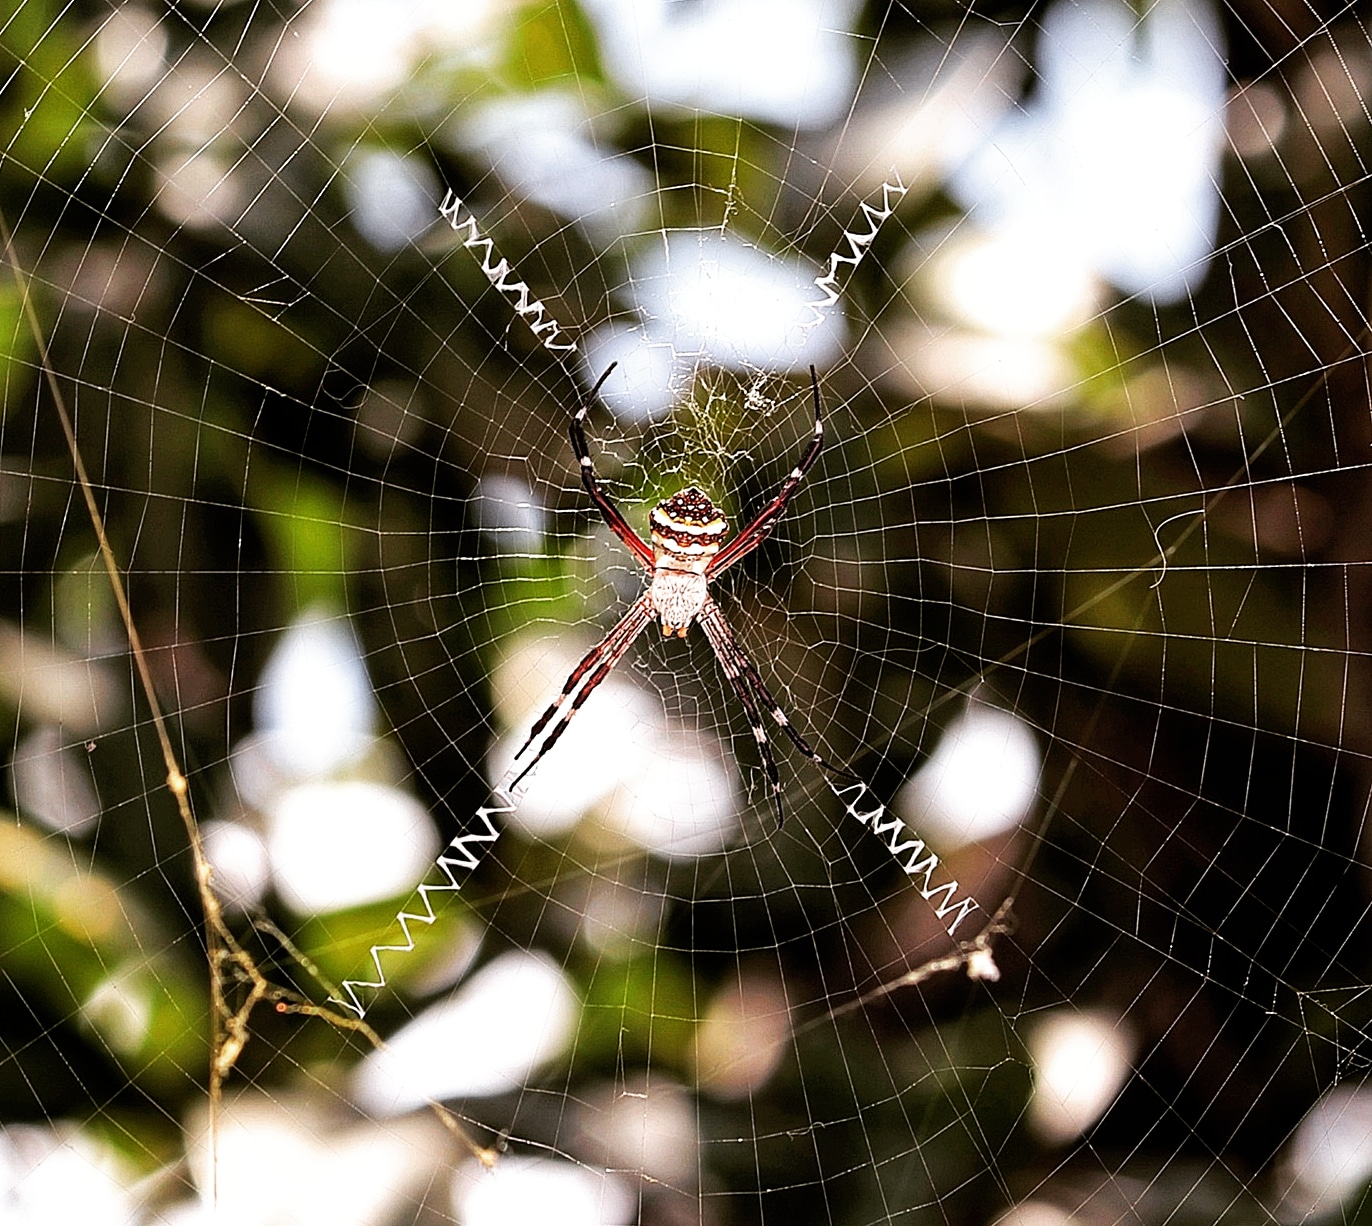 A Spider's web